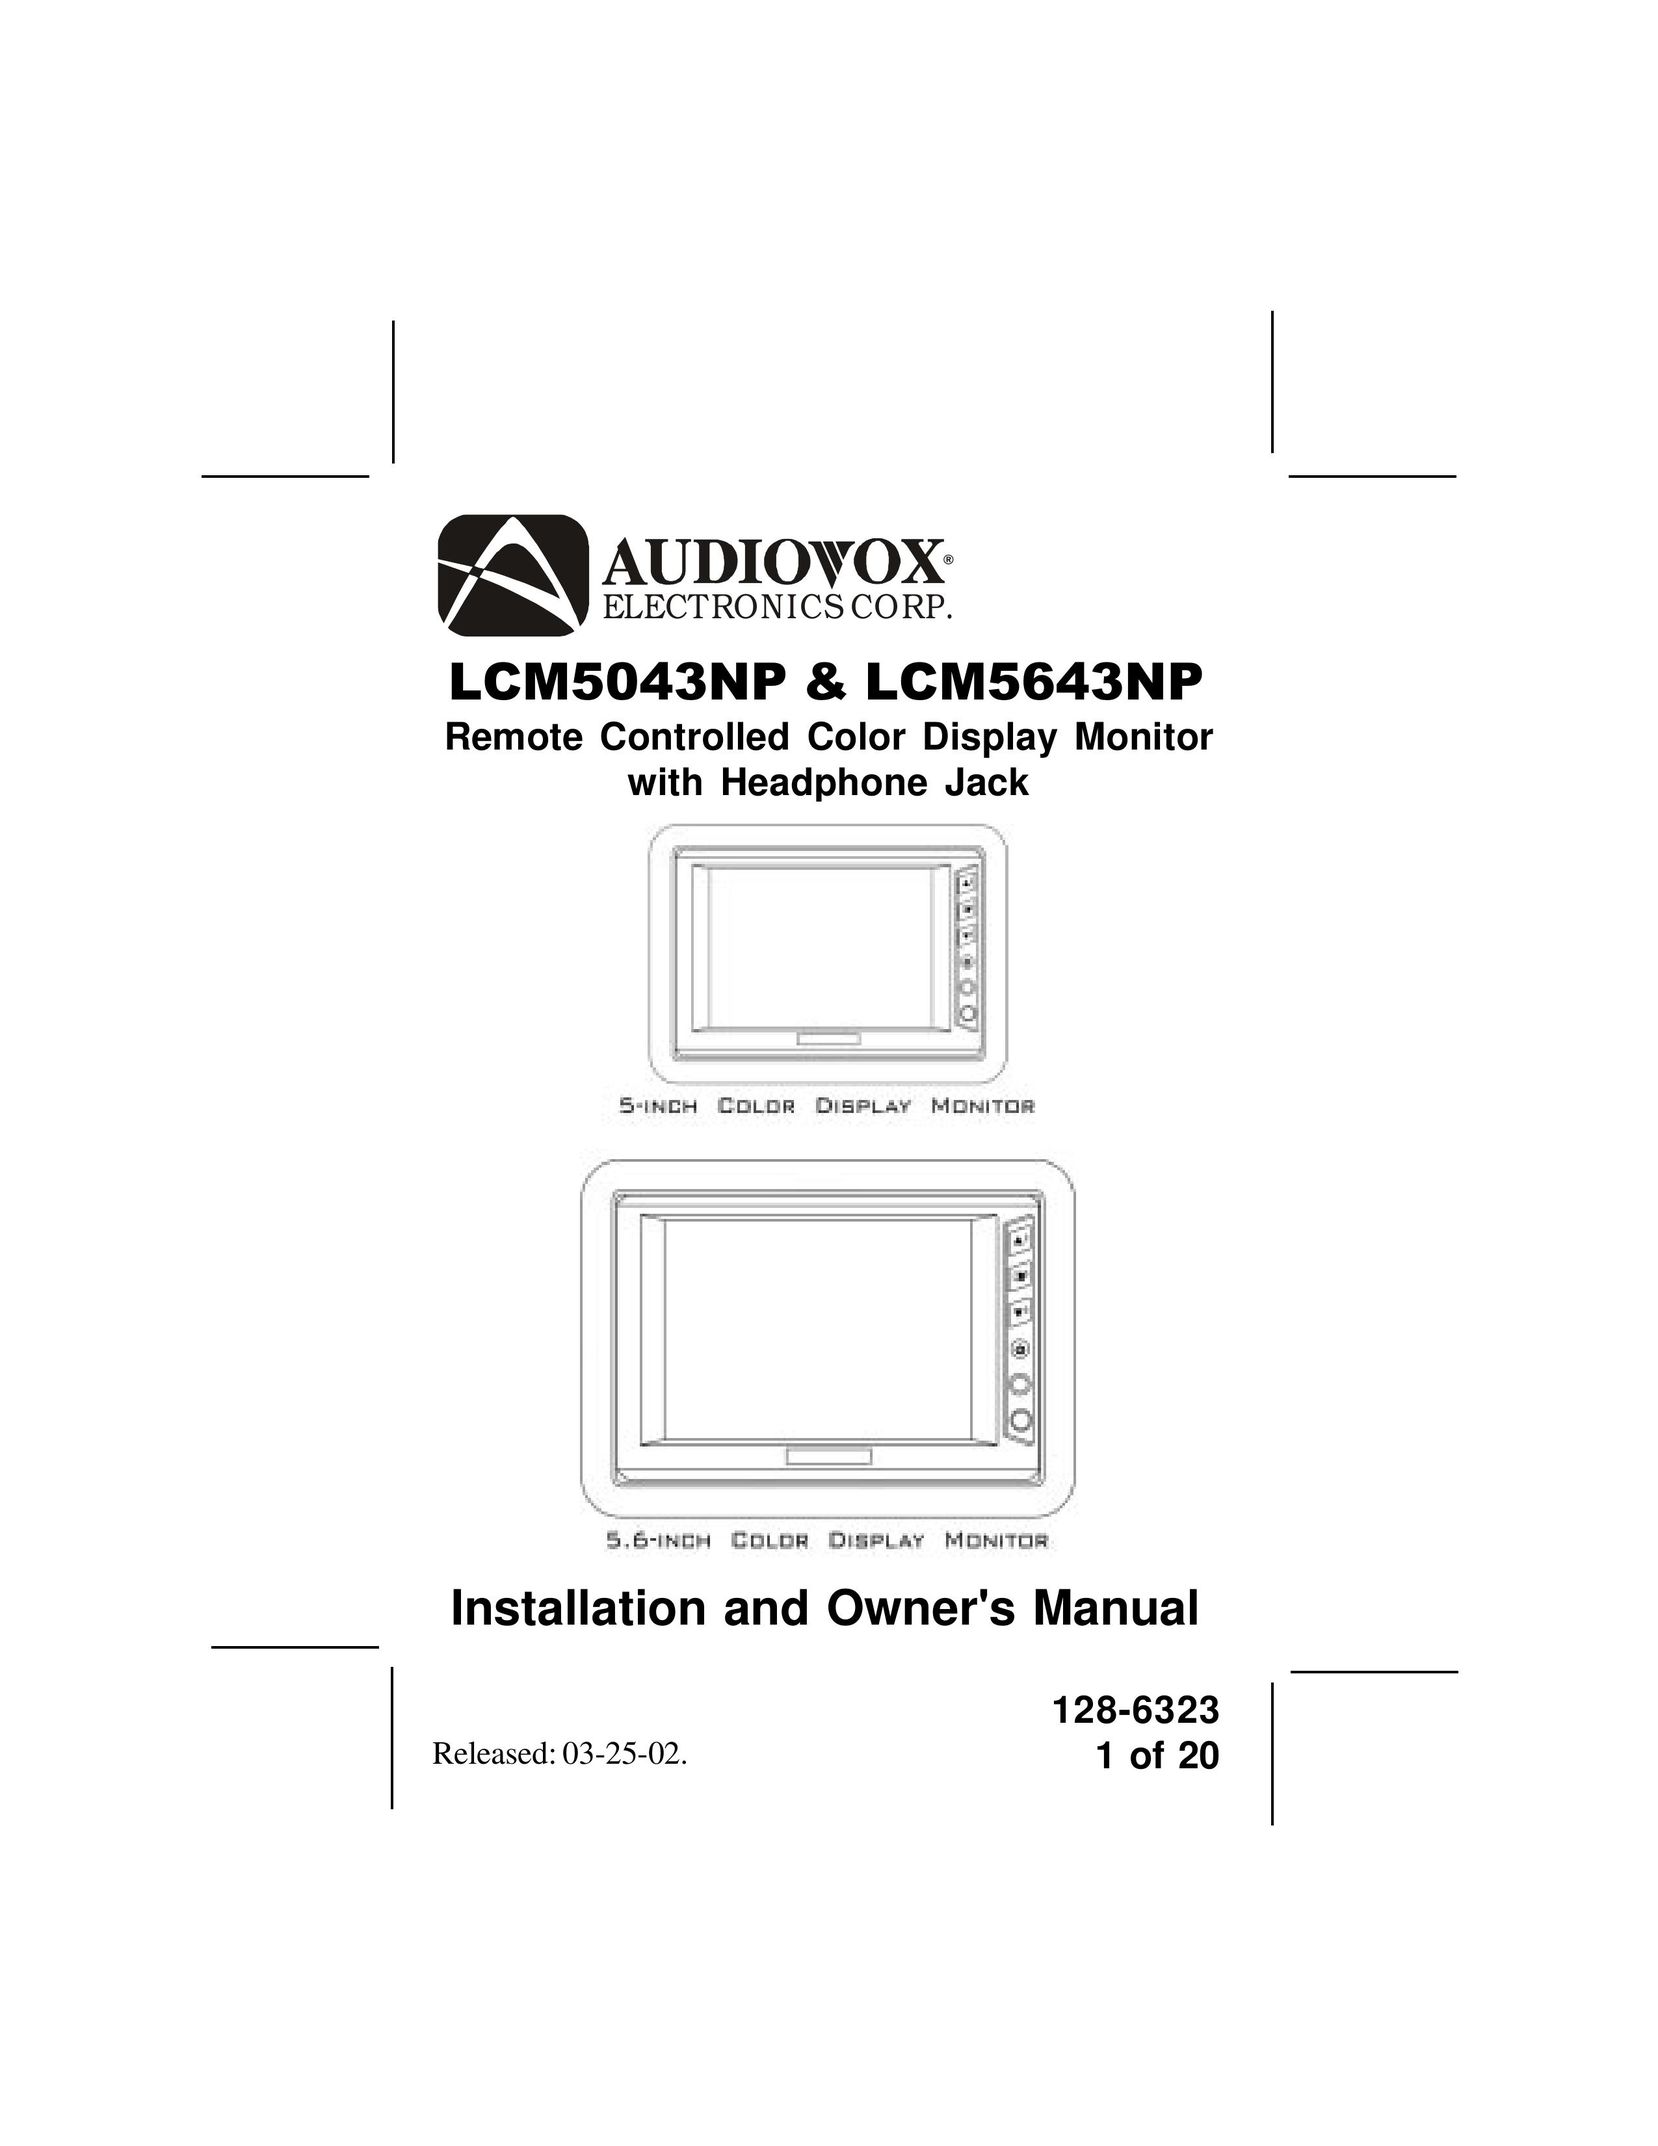 Audiovox LCM5043NP Car Video System User Manual